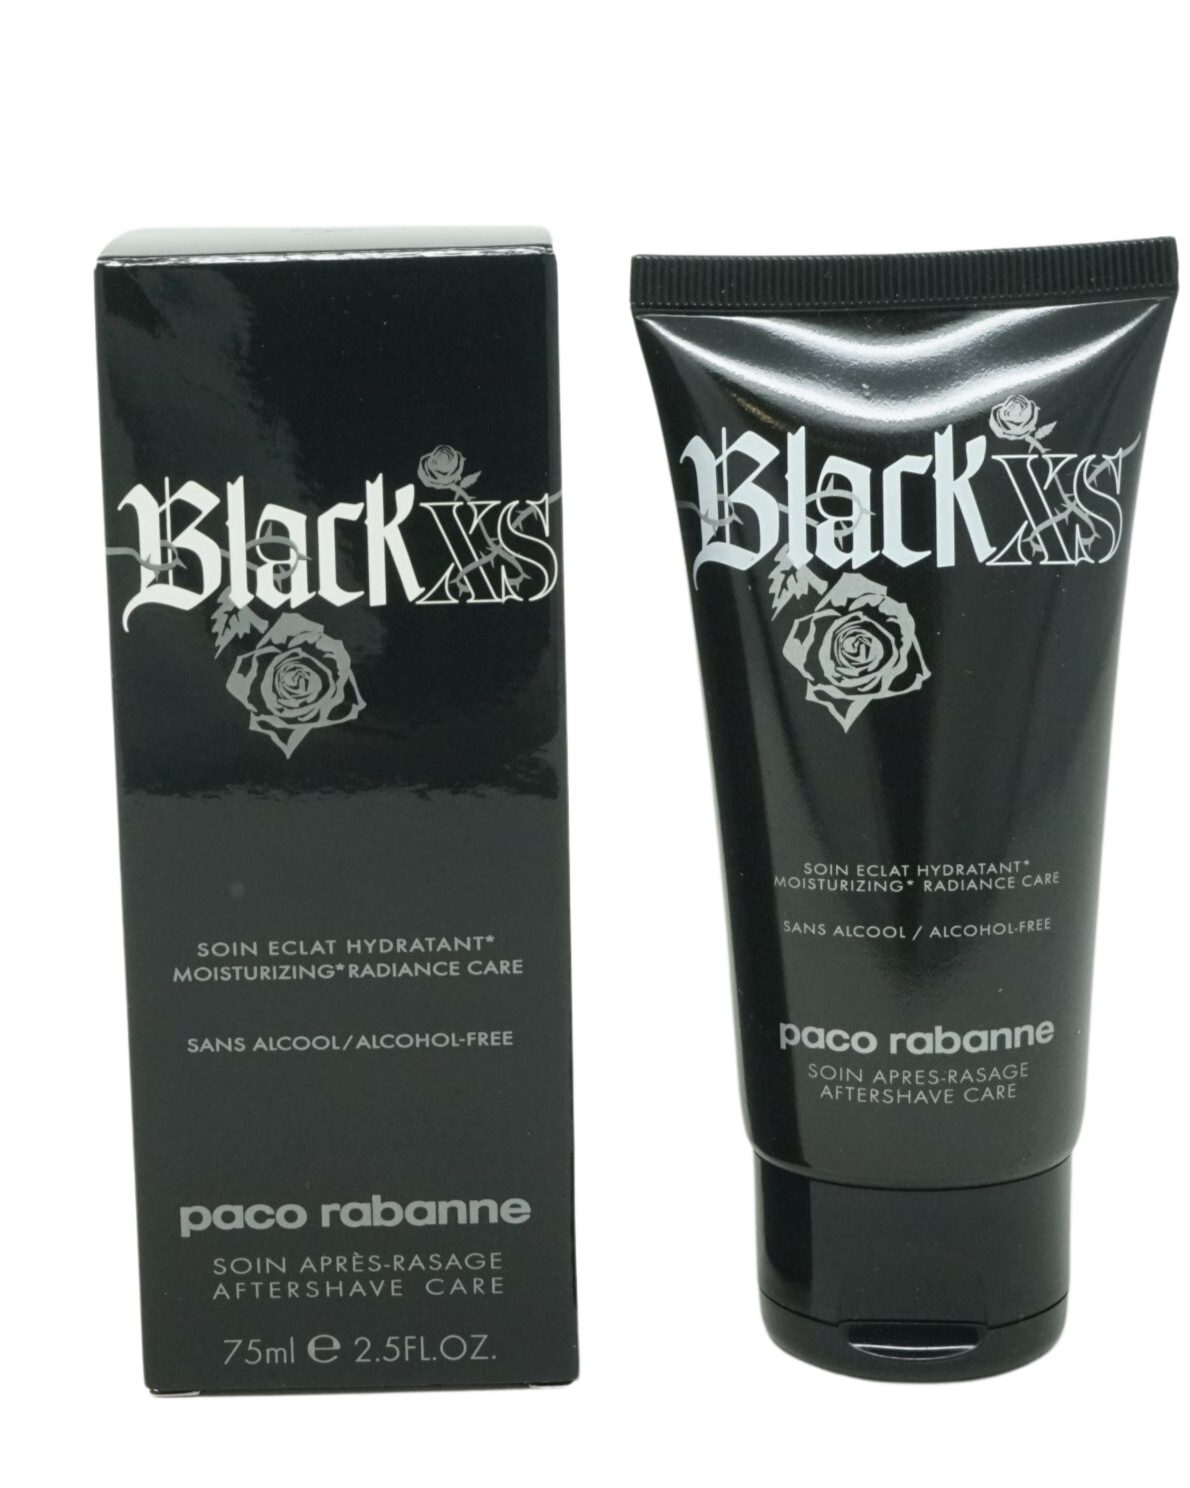 paco rabanne After-Shave paco Rabanne Black XS After Shave Care 75ml